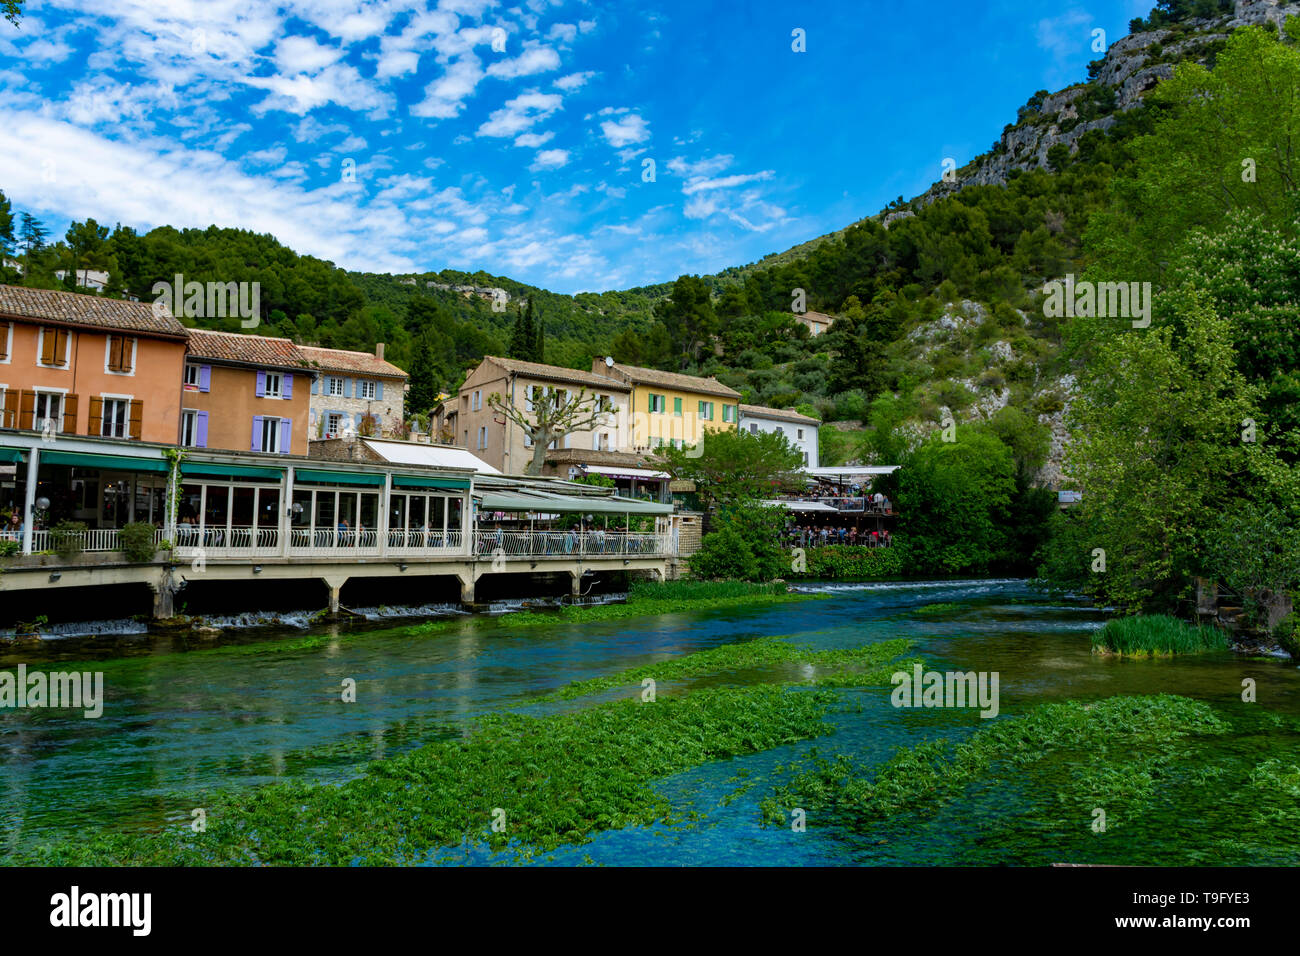 South of France, view on small touristic Provencal town of poet Petrarch Fontaine-de-vaucluse with emerald green waters of Sorgue river Stock Photo